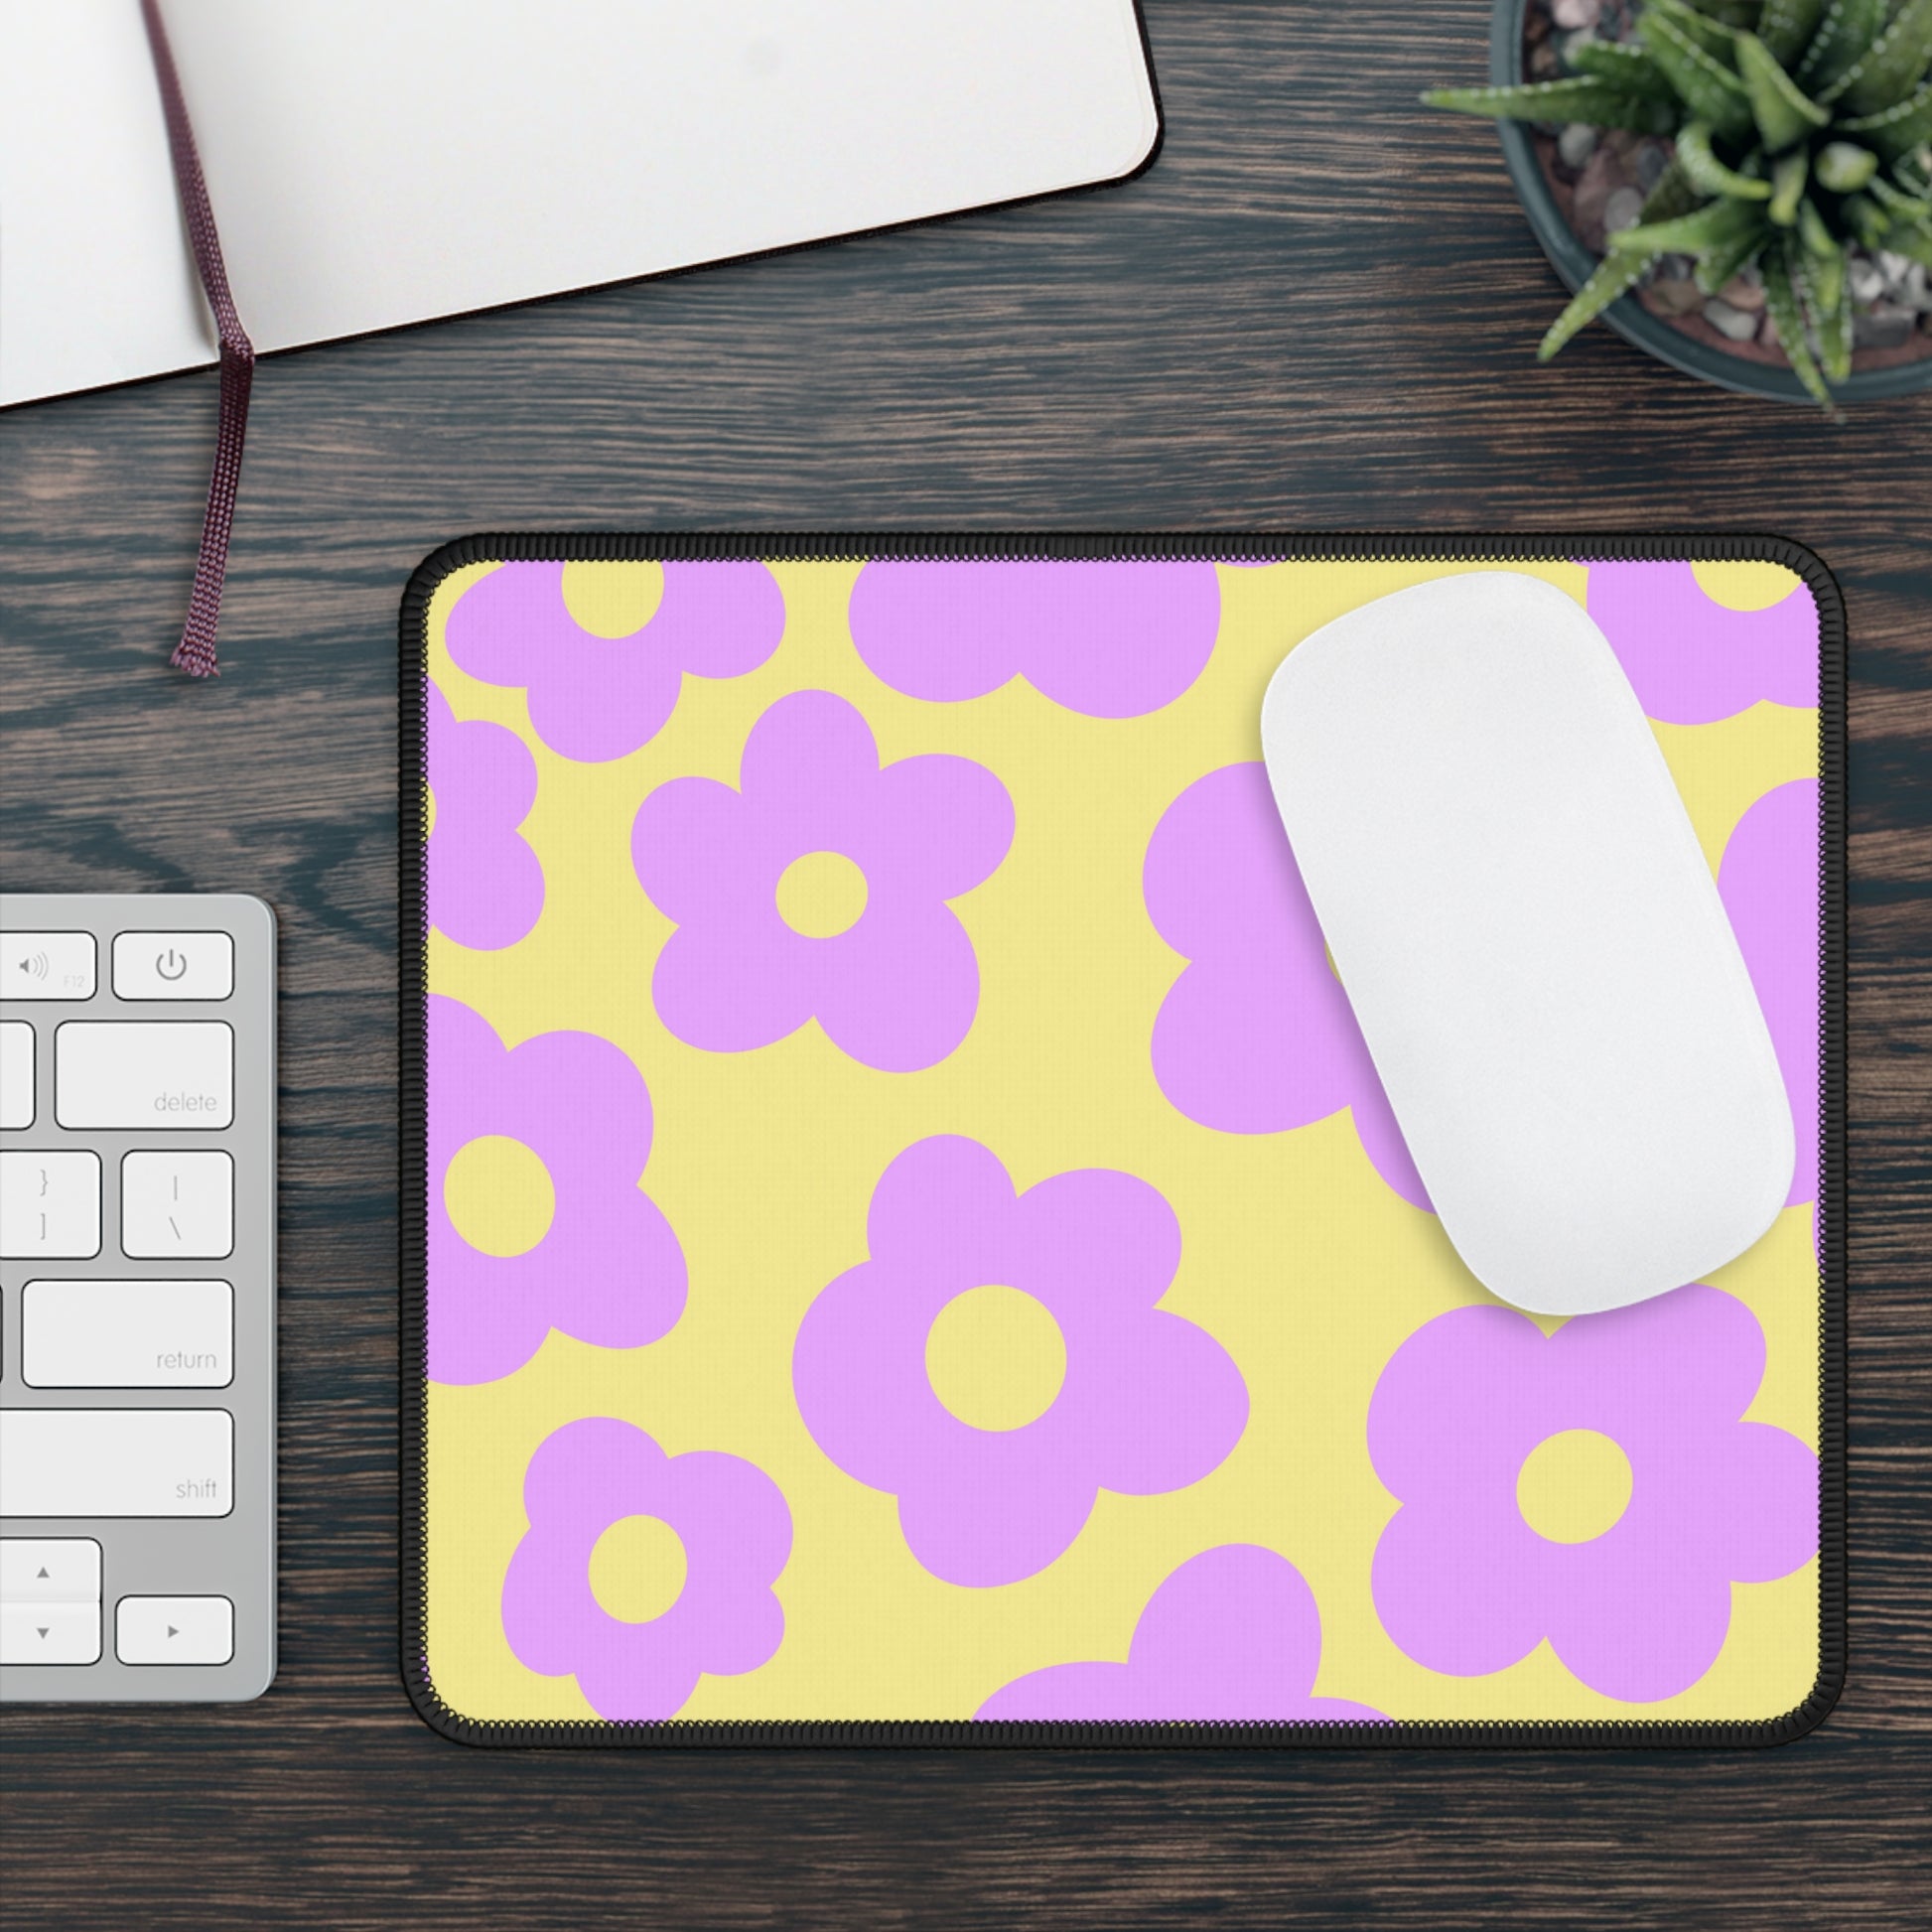 A gaming mouse pad with purple flowers on a yellow background. A mouse sits on top of it.